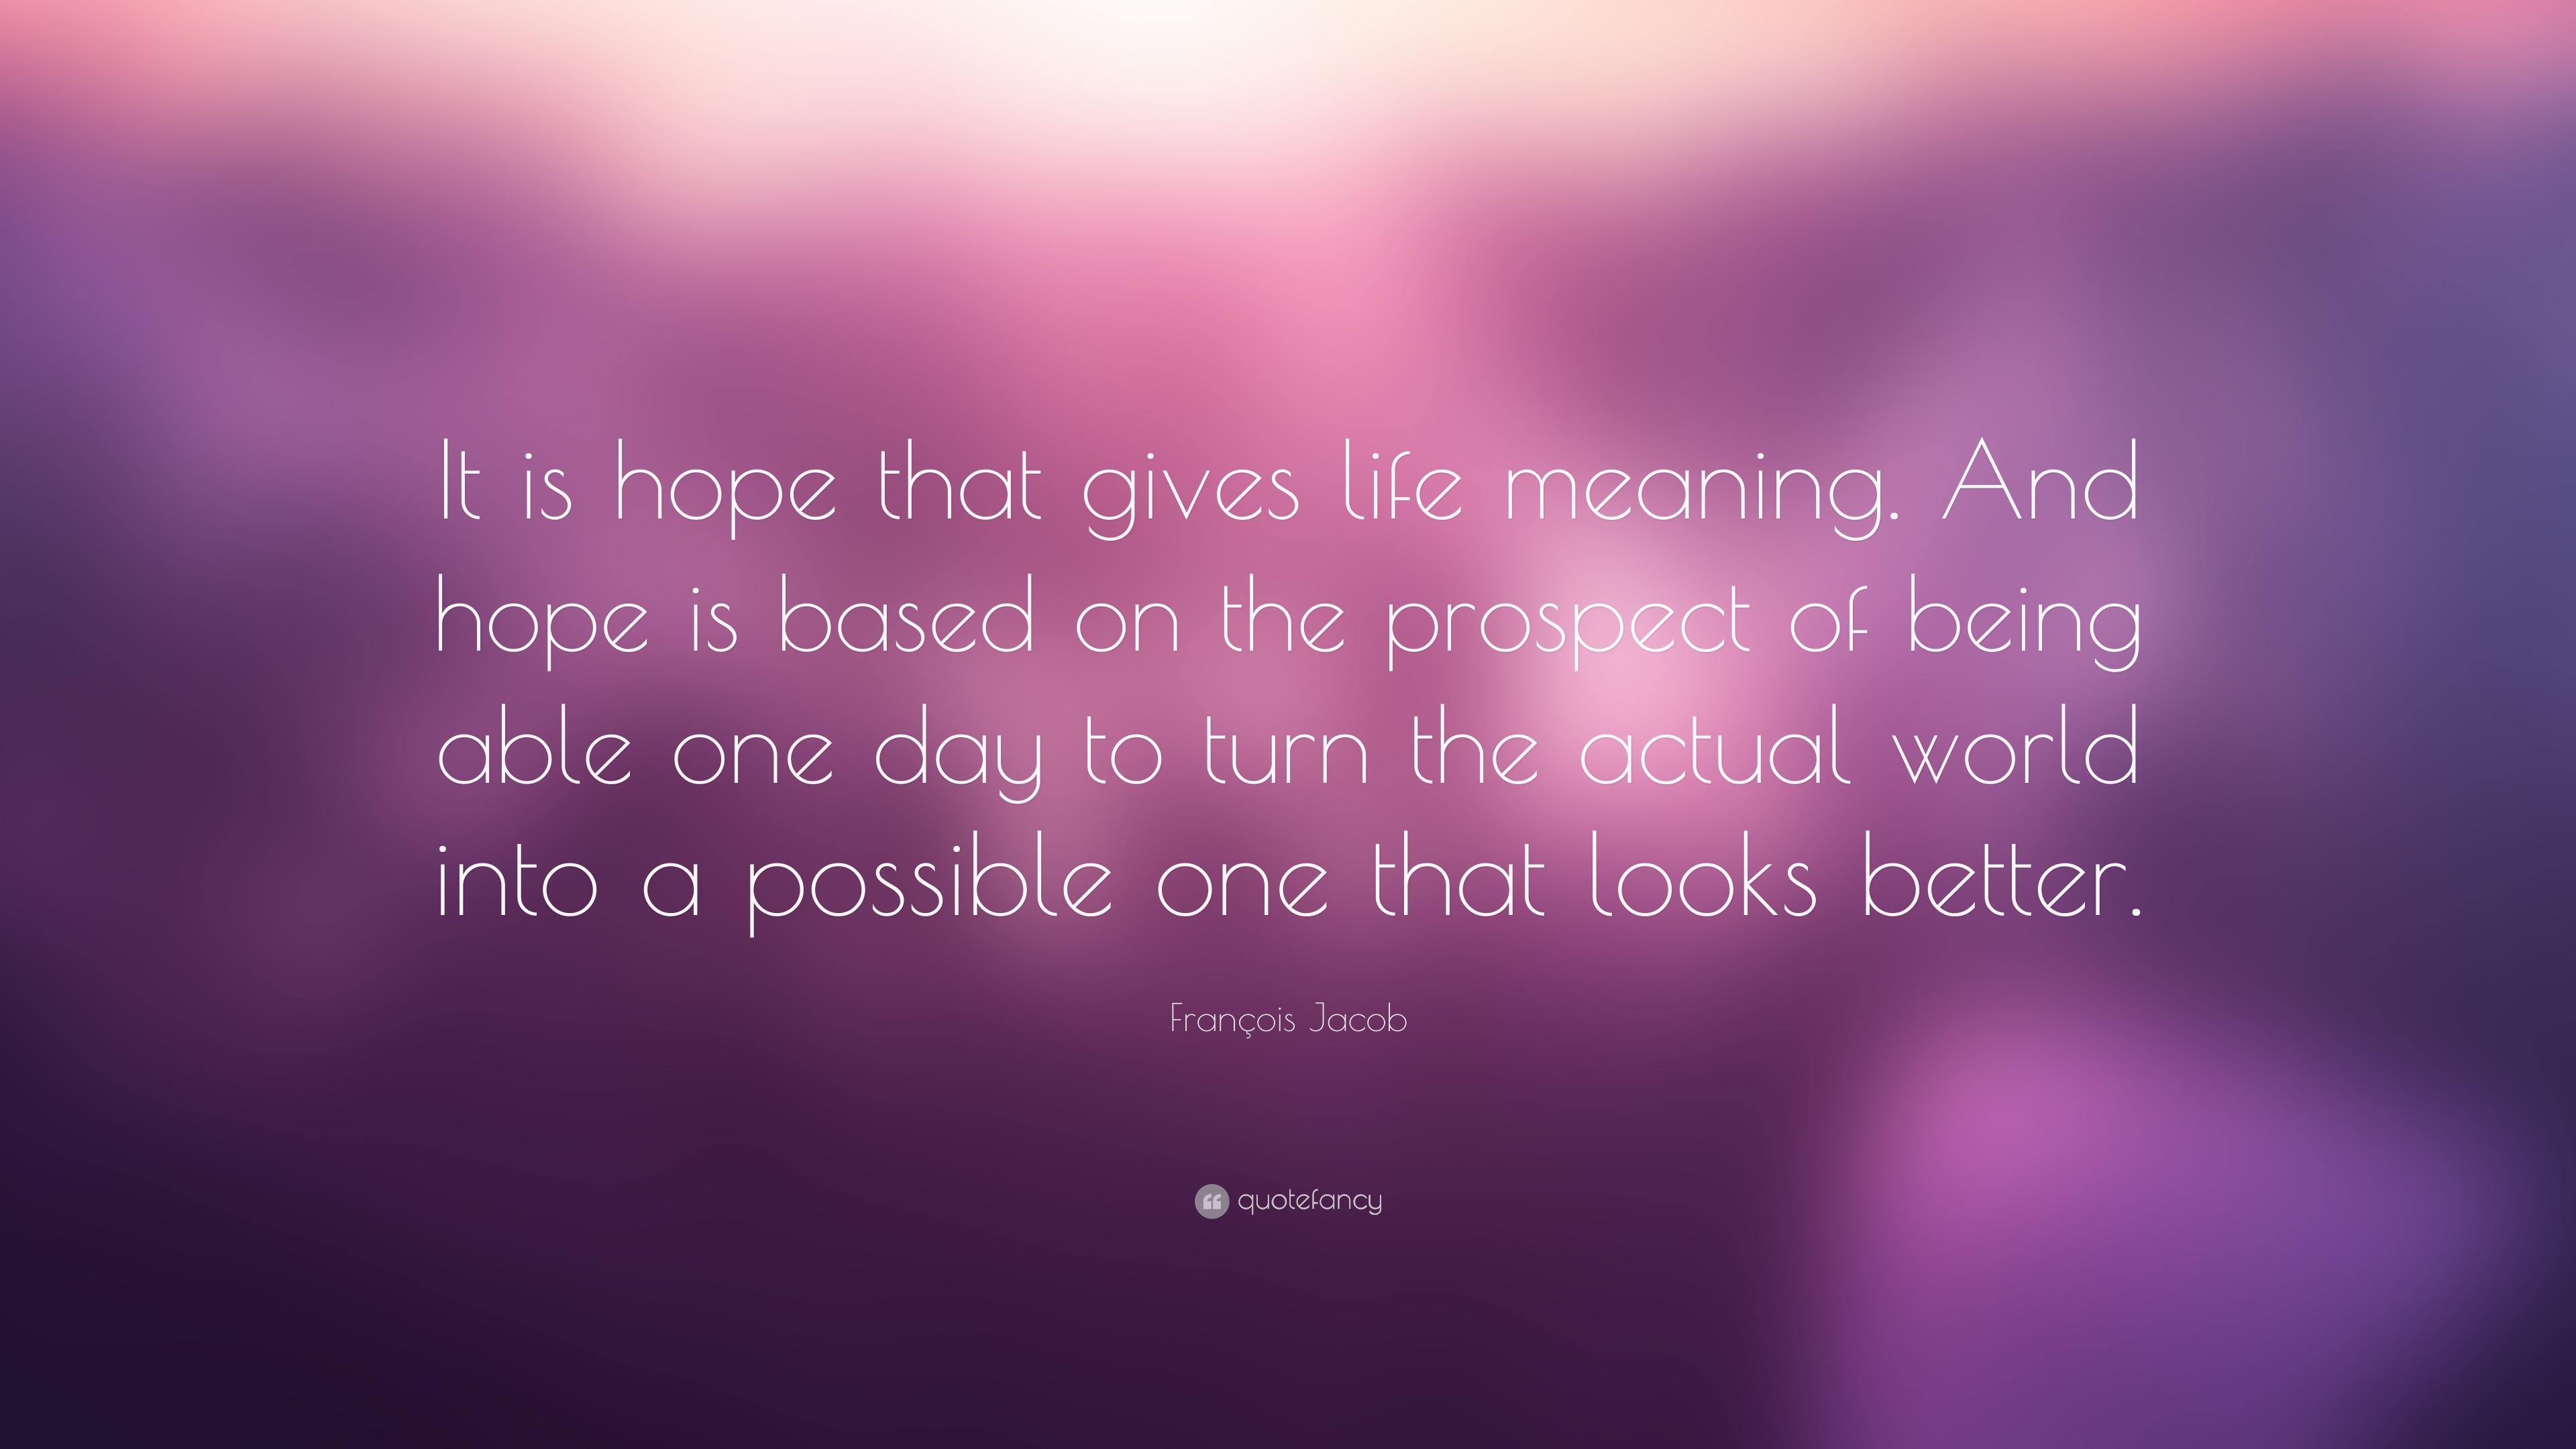 François Jacob Quote: “It is hope that gives life meaning. And hope